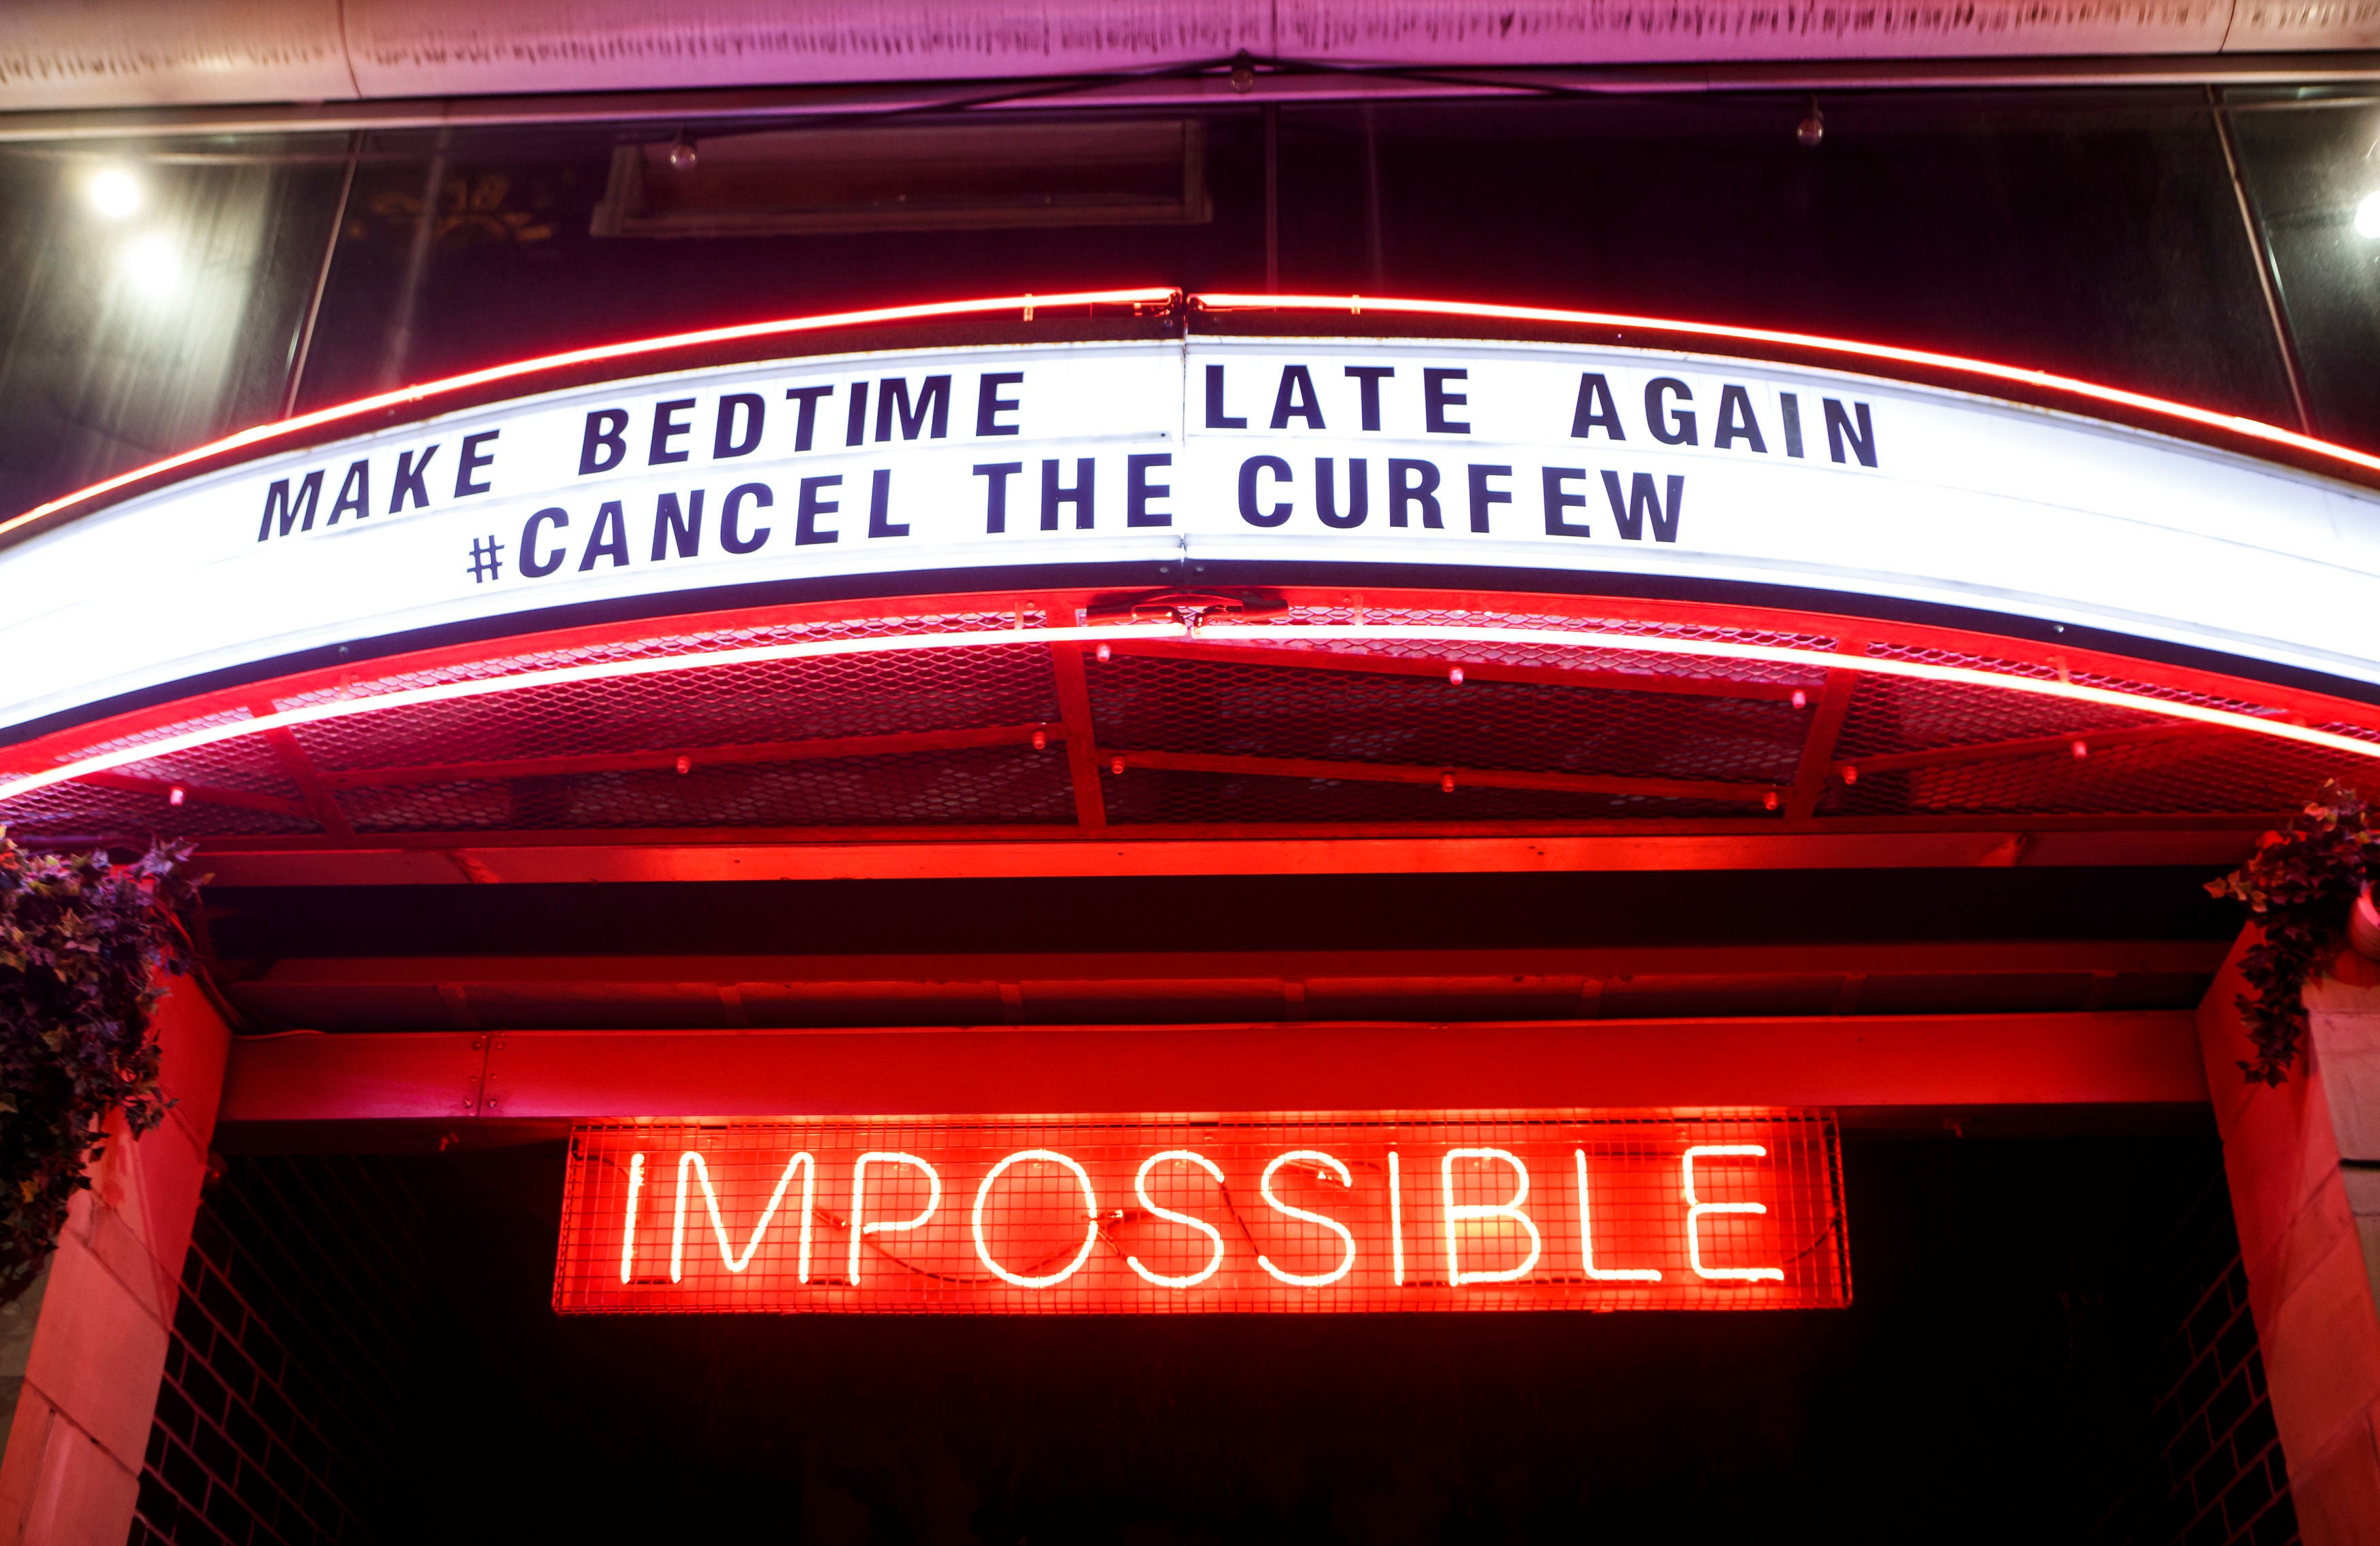 A bar sign in Manchester calling for the cancellation of curfews on venues